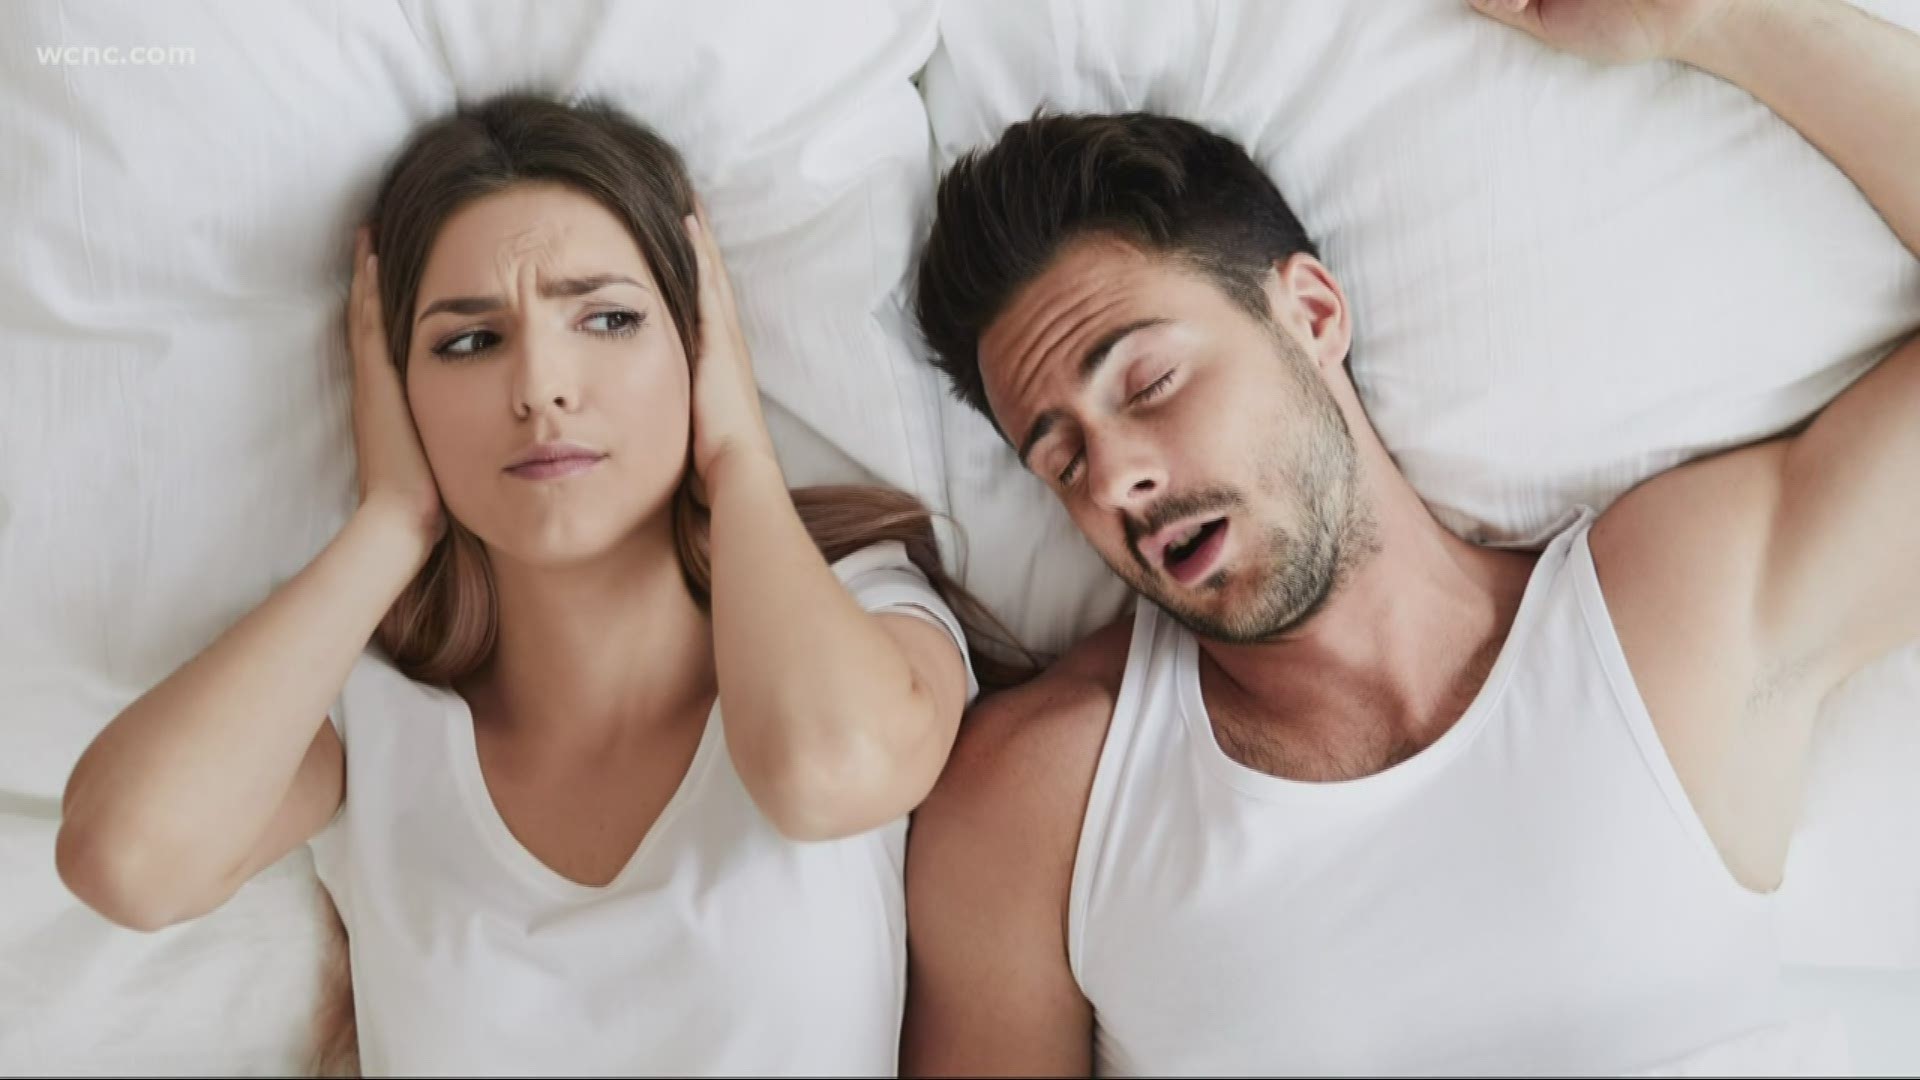 A new survey found that 40% of people would be hesitant to enter a relationship with someone who has different sleeping habits than them.